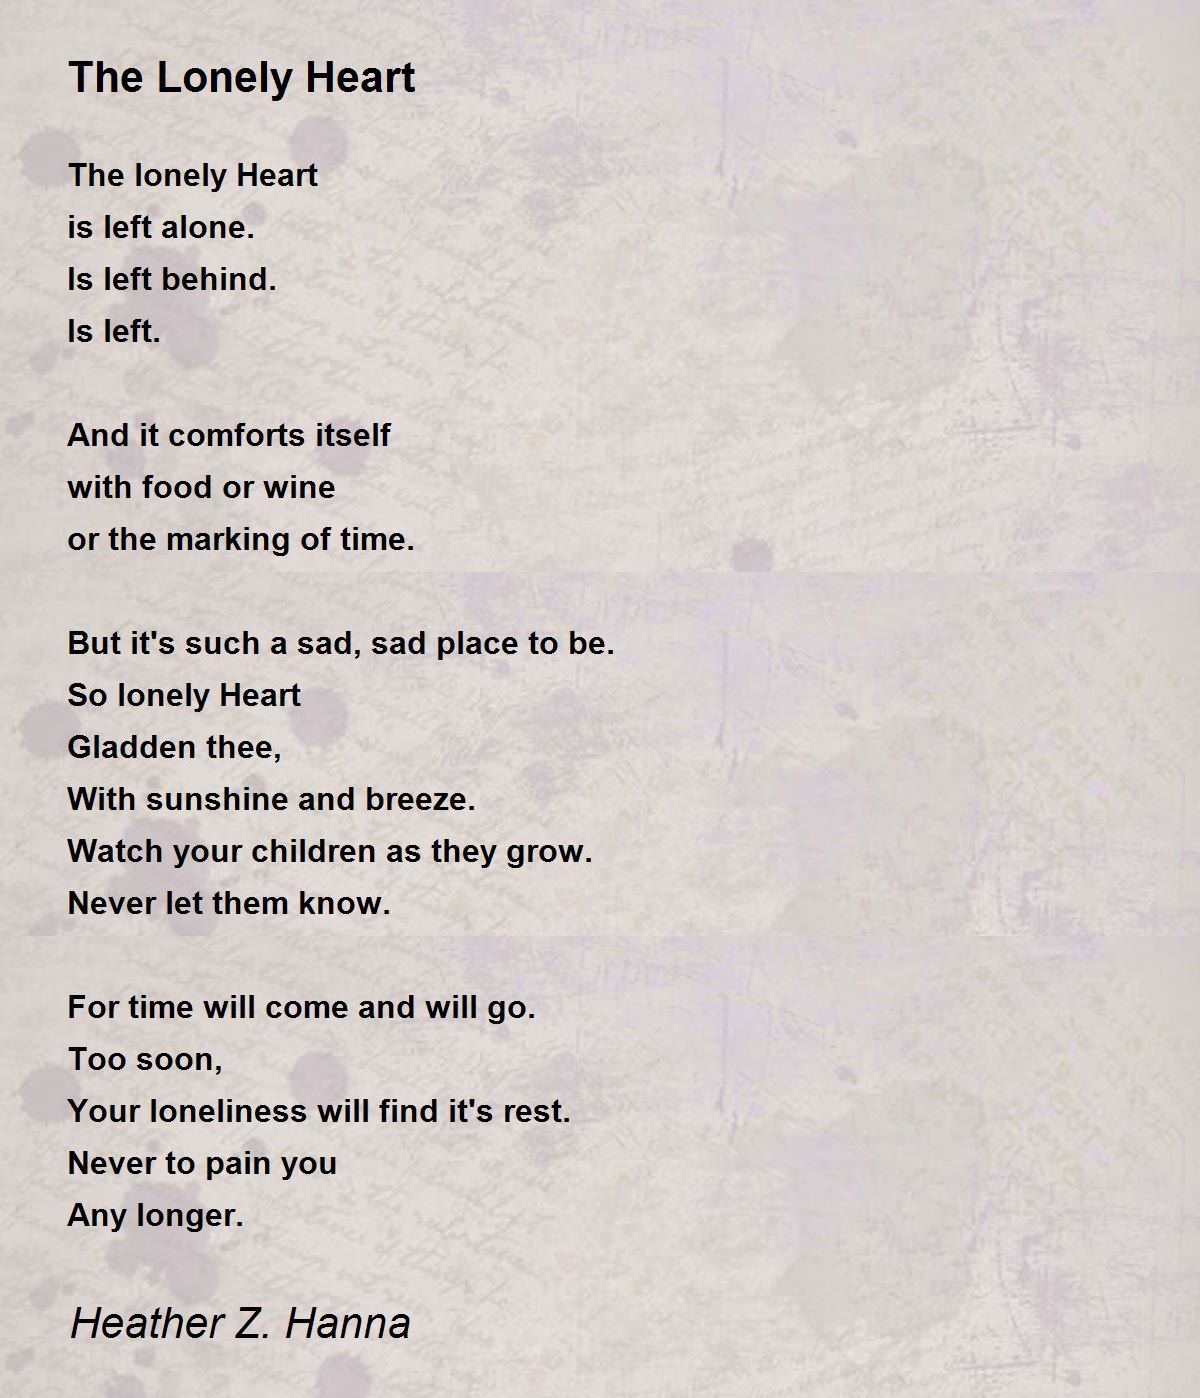 The Lonely Heart - The Lonely Heart Poem by Heather Z. Hanna